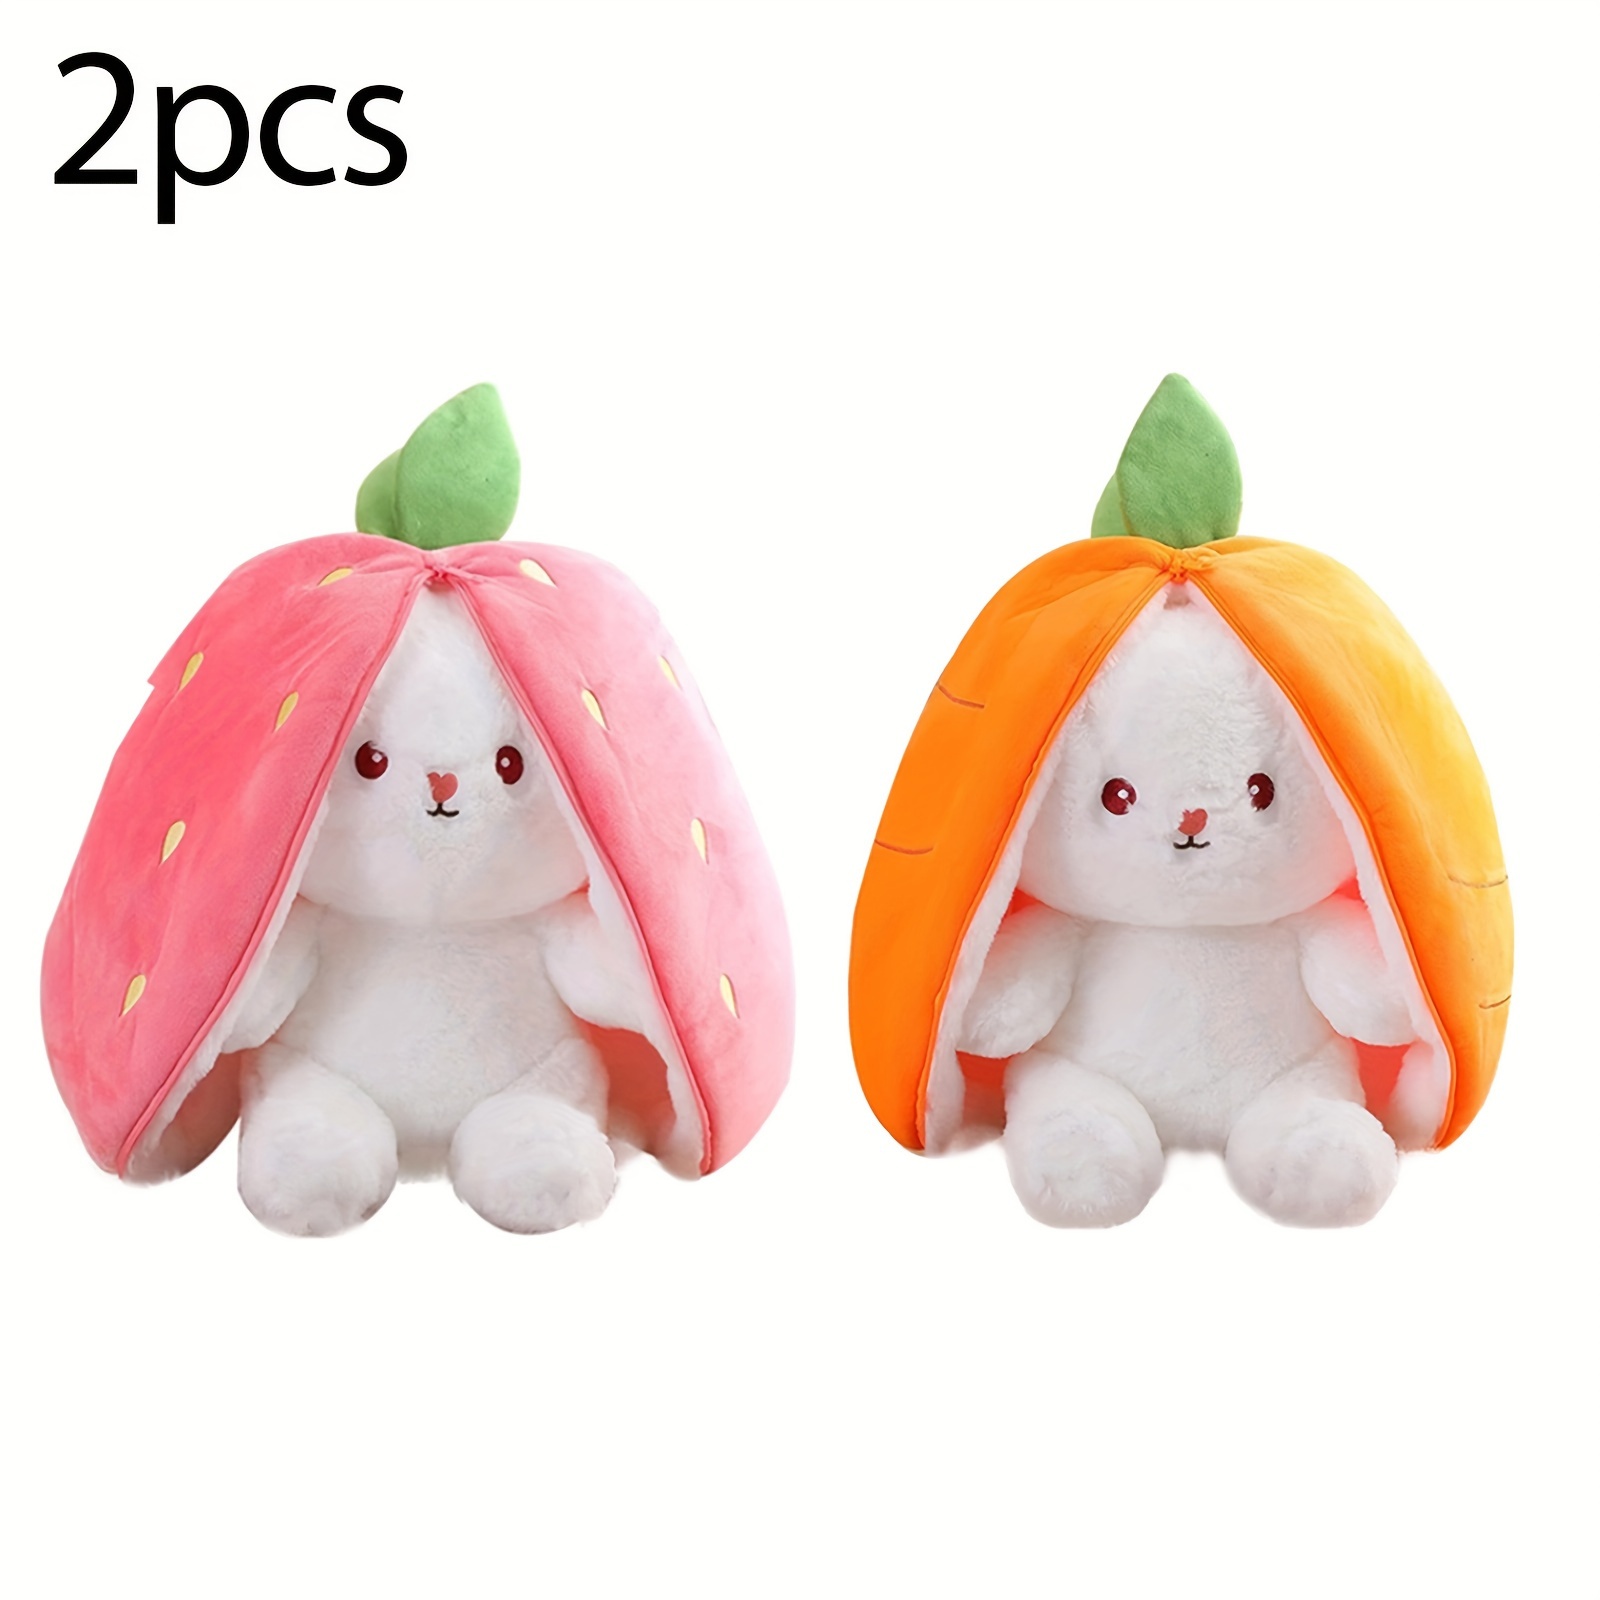 

2pcs Easter Bunny Stuffed Animal, Strawberry And Carrot Bunny Plush,cute Reversible Rabbit Plush With Zipper, Easter Lovely Gift For Boys And Girls